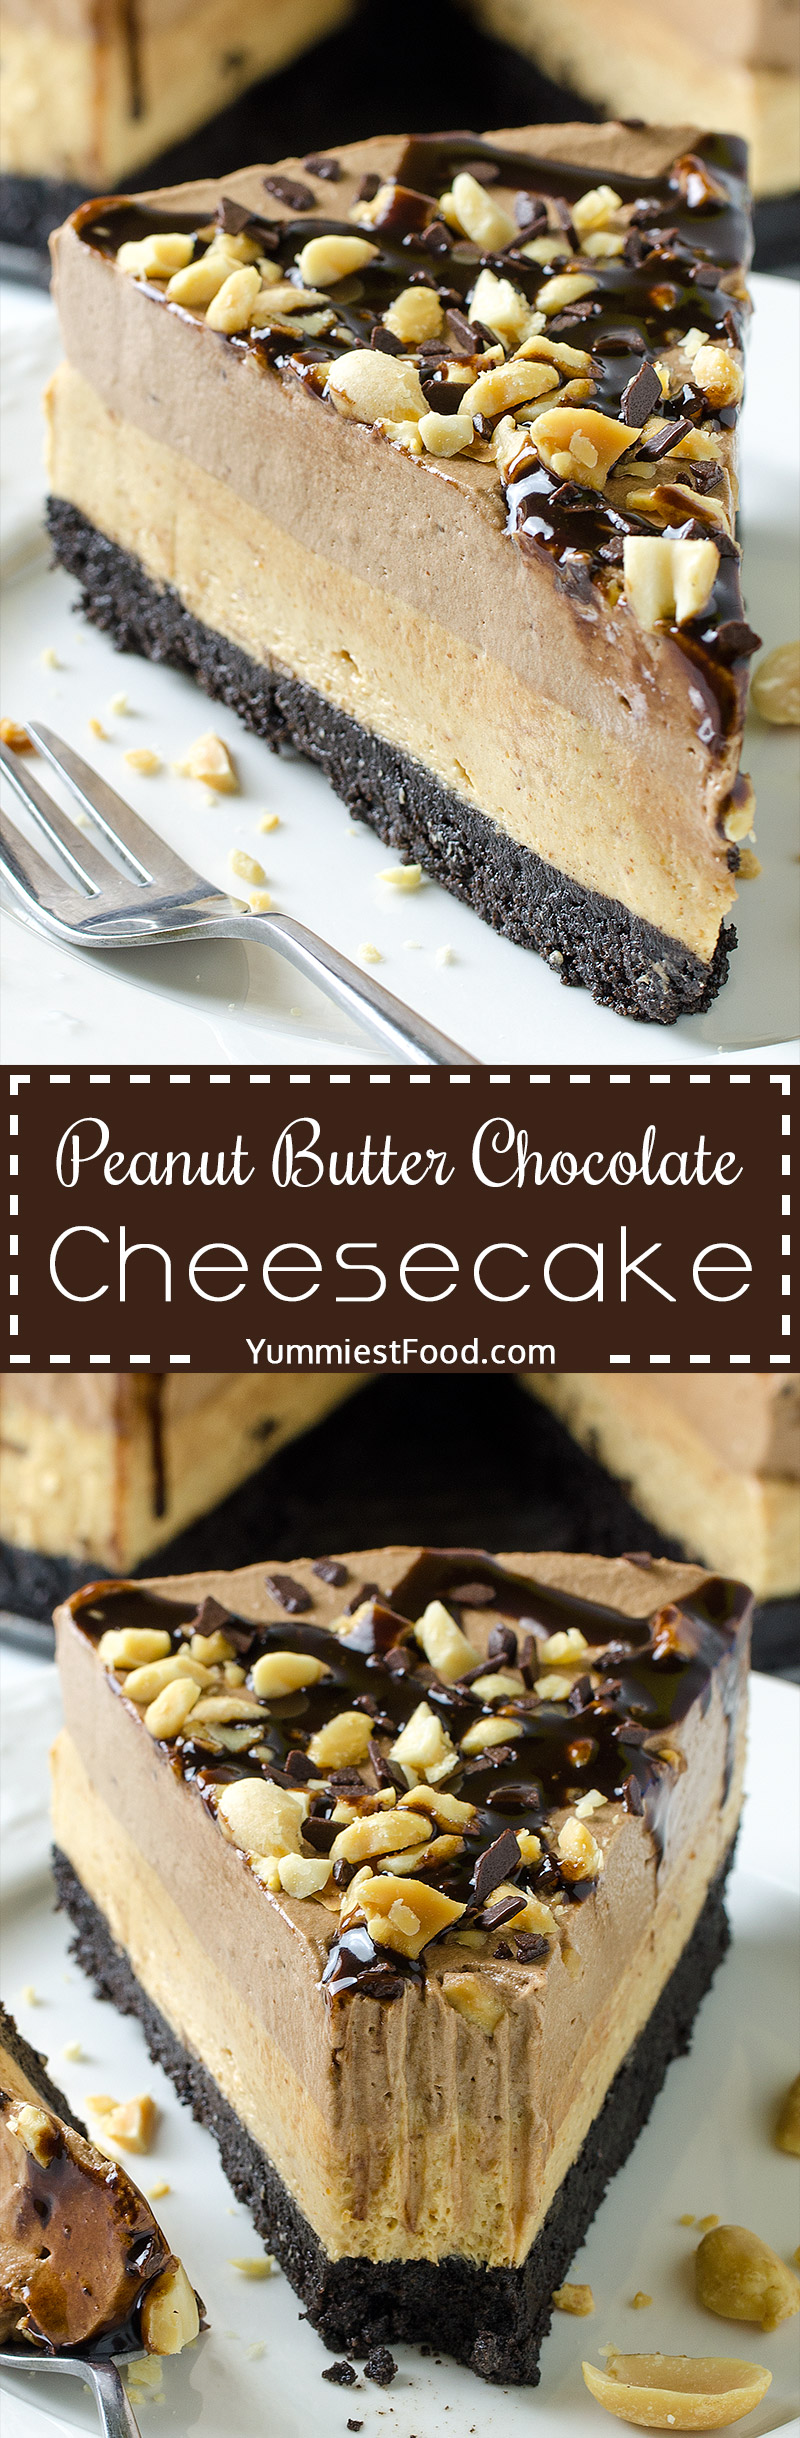 PEANUT BUTTER CHOCOLATE CHEESECAKE - NO BAKE - is a quick and easy Oreo, peanut butter and chocolate dessert recipe, perfect for summer and anytime you need no-bake dessert